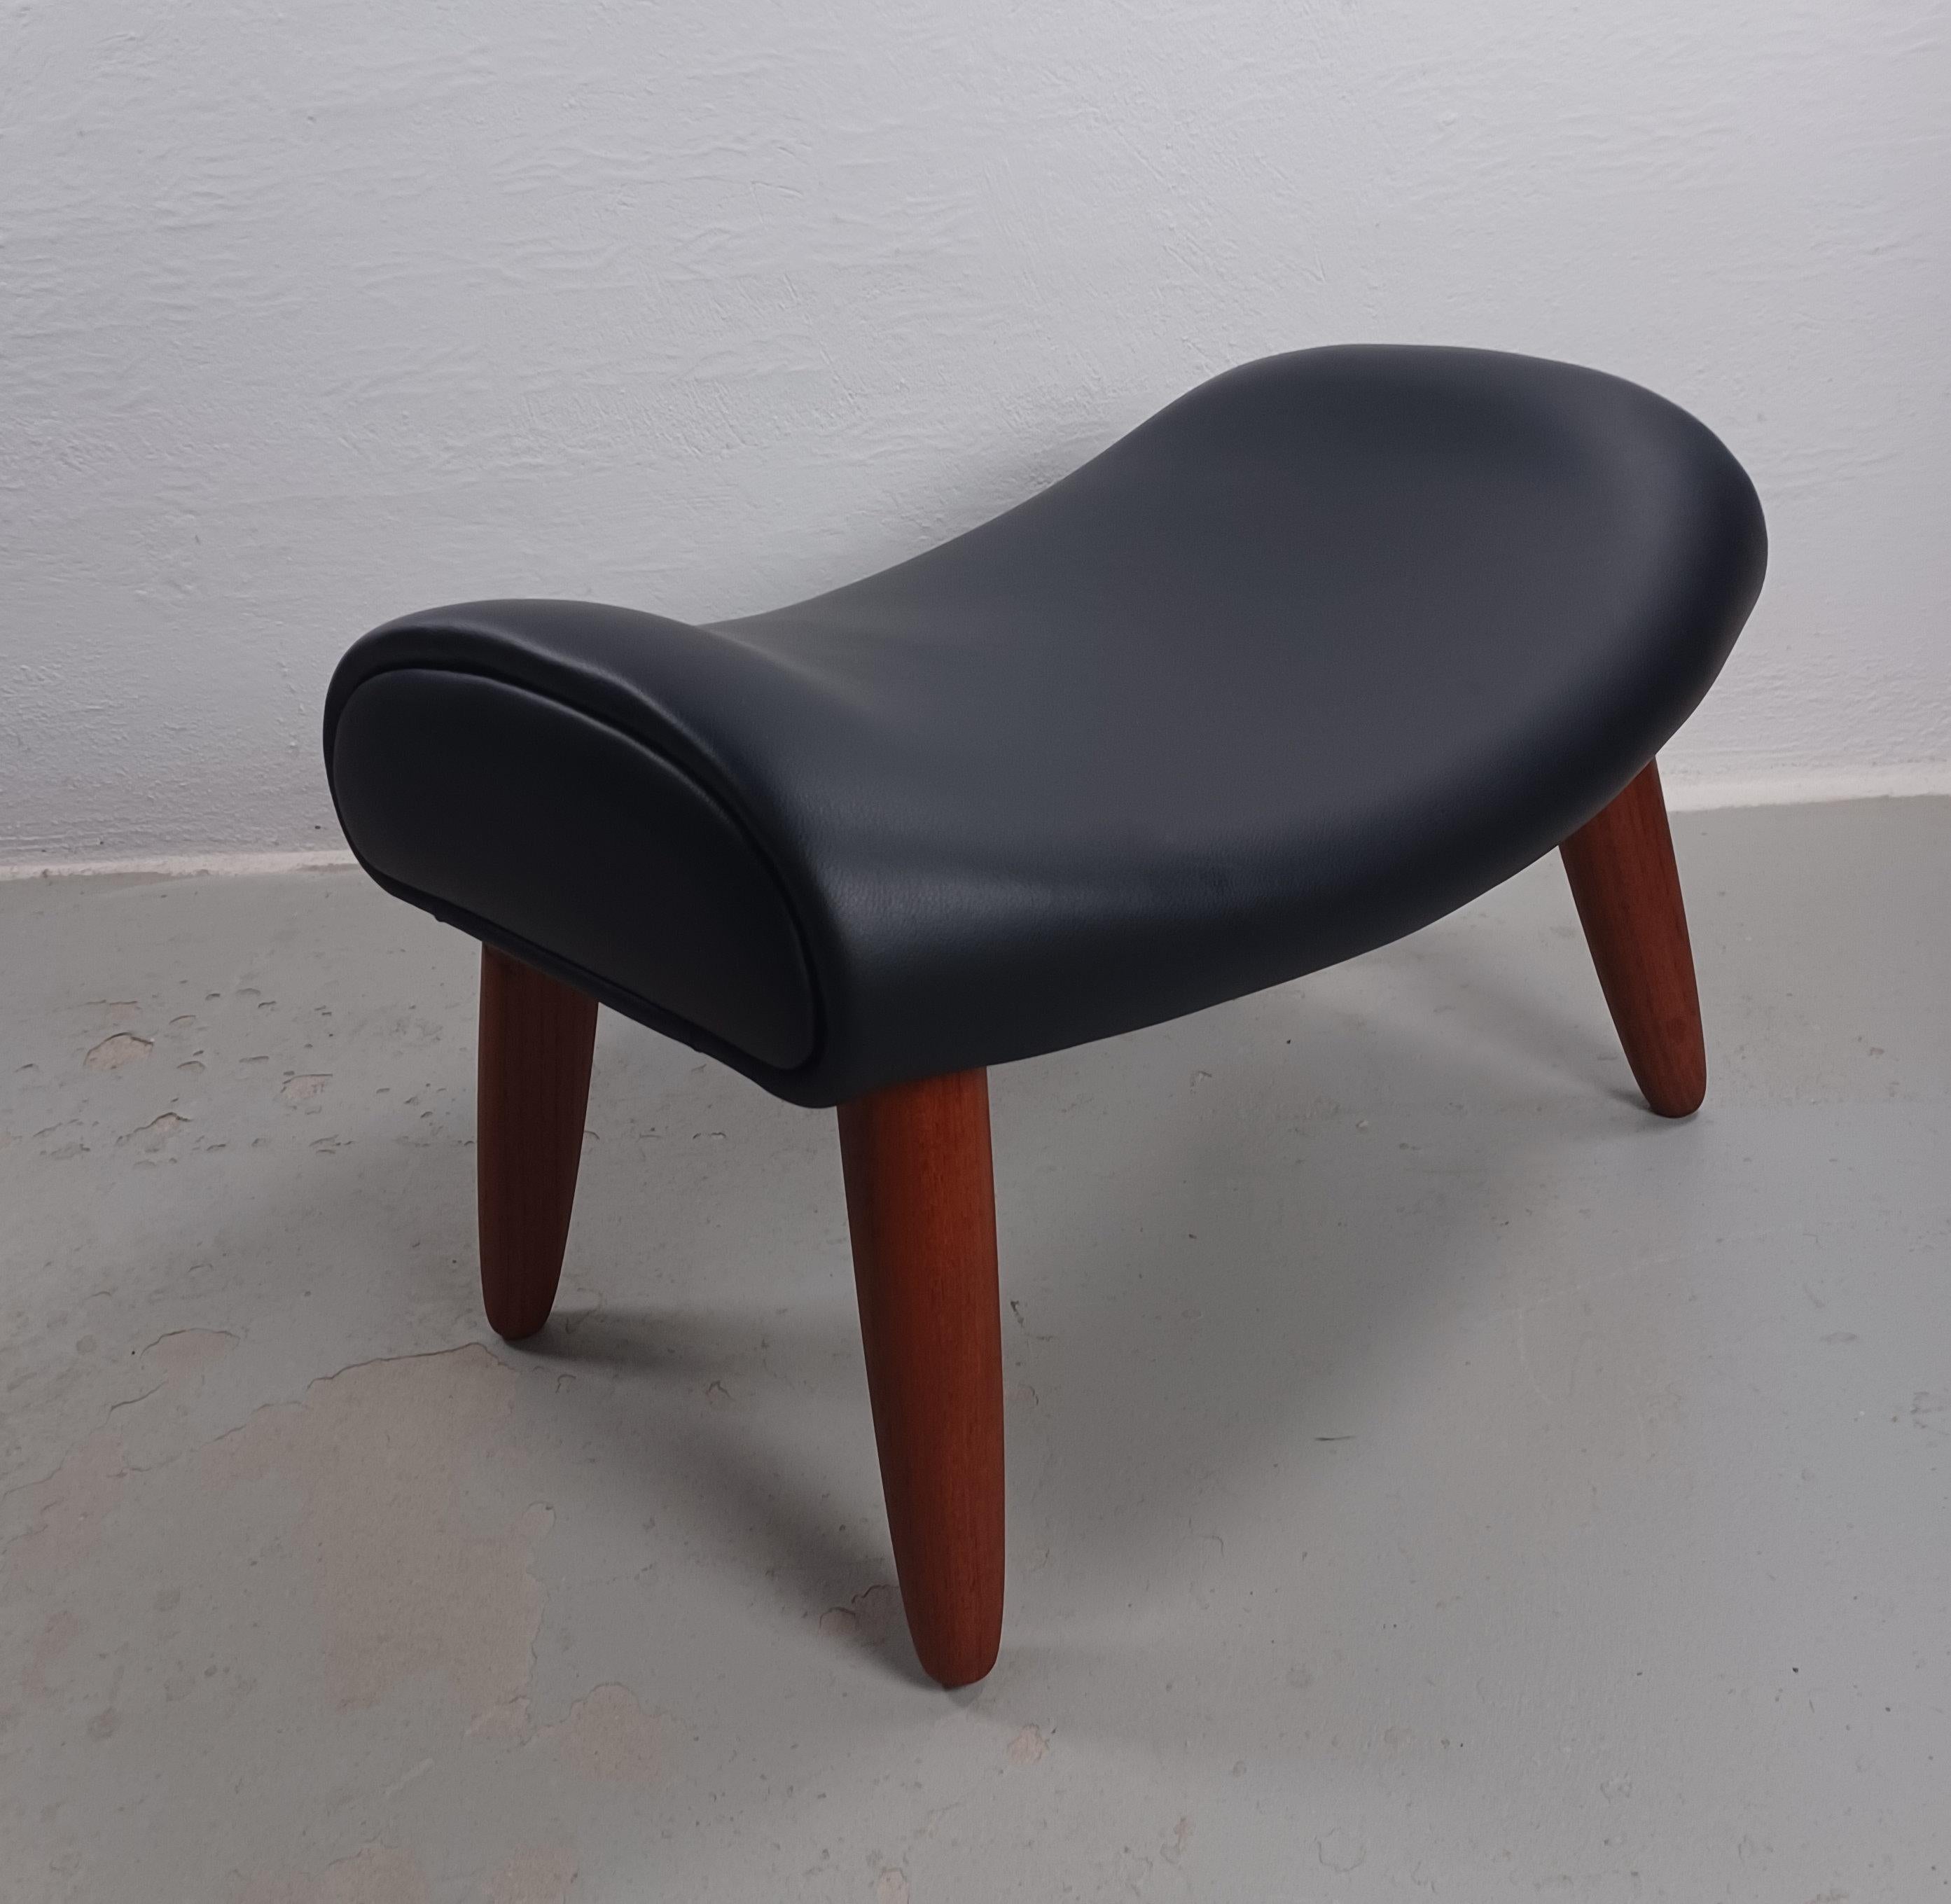 1950´s Reupholstered Danish footstool in teak and black leather

Danish footstool from the 1960´s in solid teak with elegant curved seat making it comfortable to sit on if needed.

The footstool has been fully restored boy our cabinetmaker to ensure